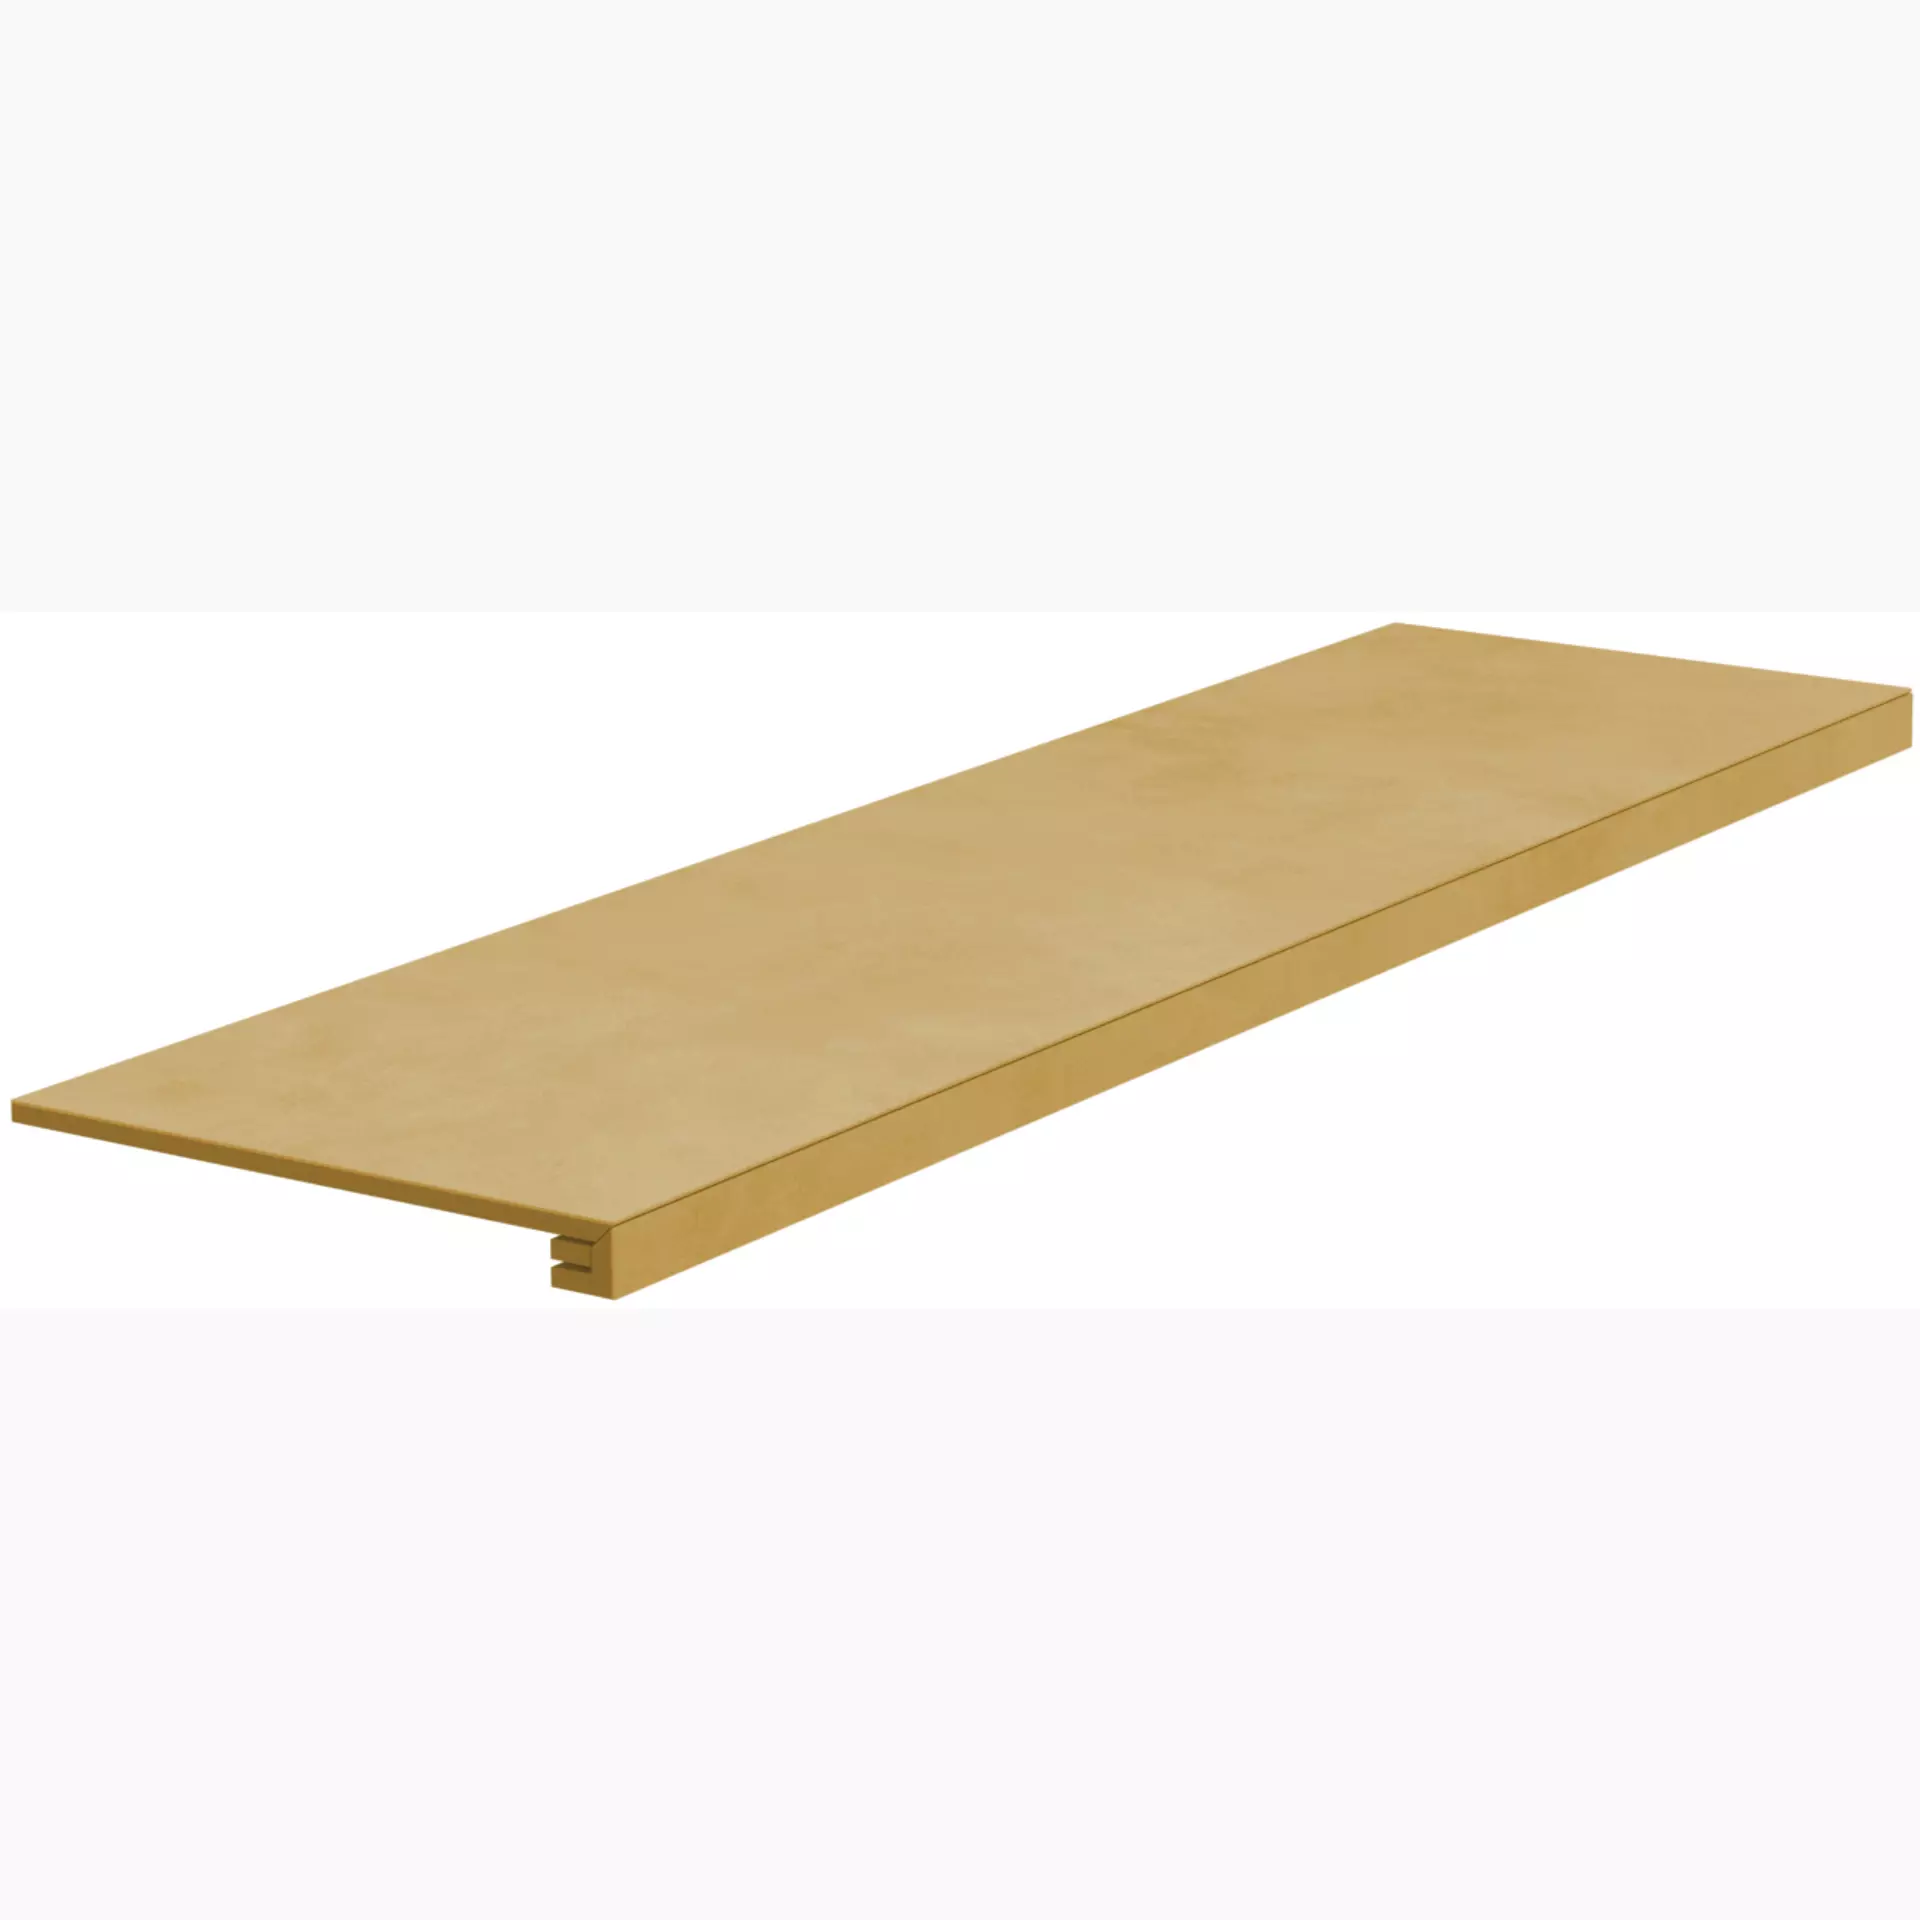 Del Conca Htl Timeline Sun Htl07 Naturale Step plate Lineare G3TL07RG12 33x120cm rectified 8,5mm